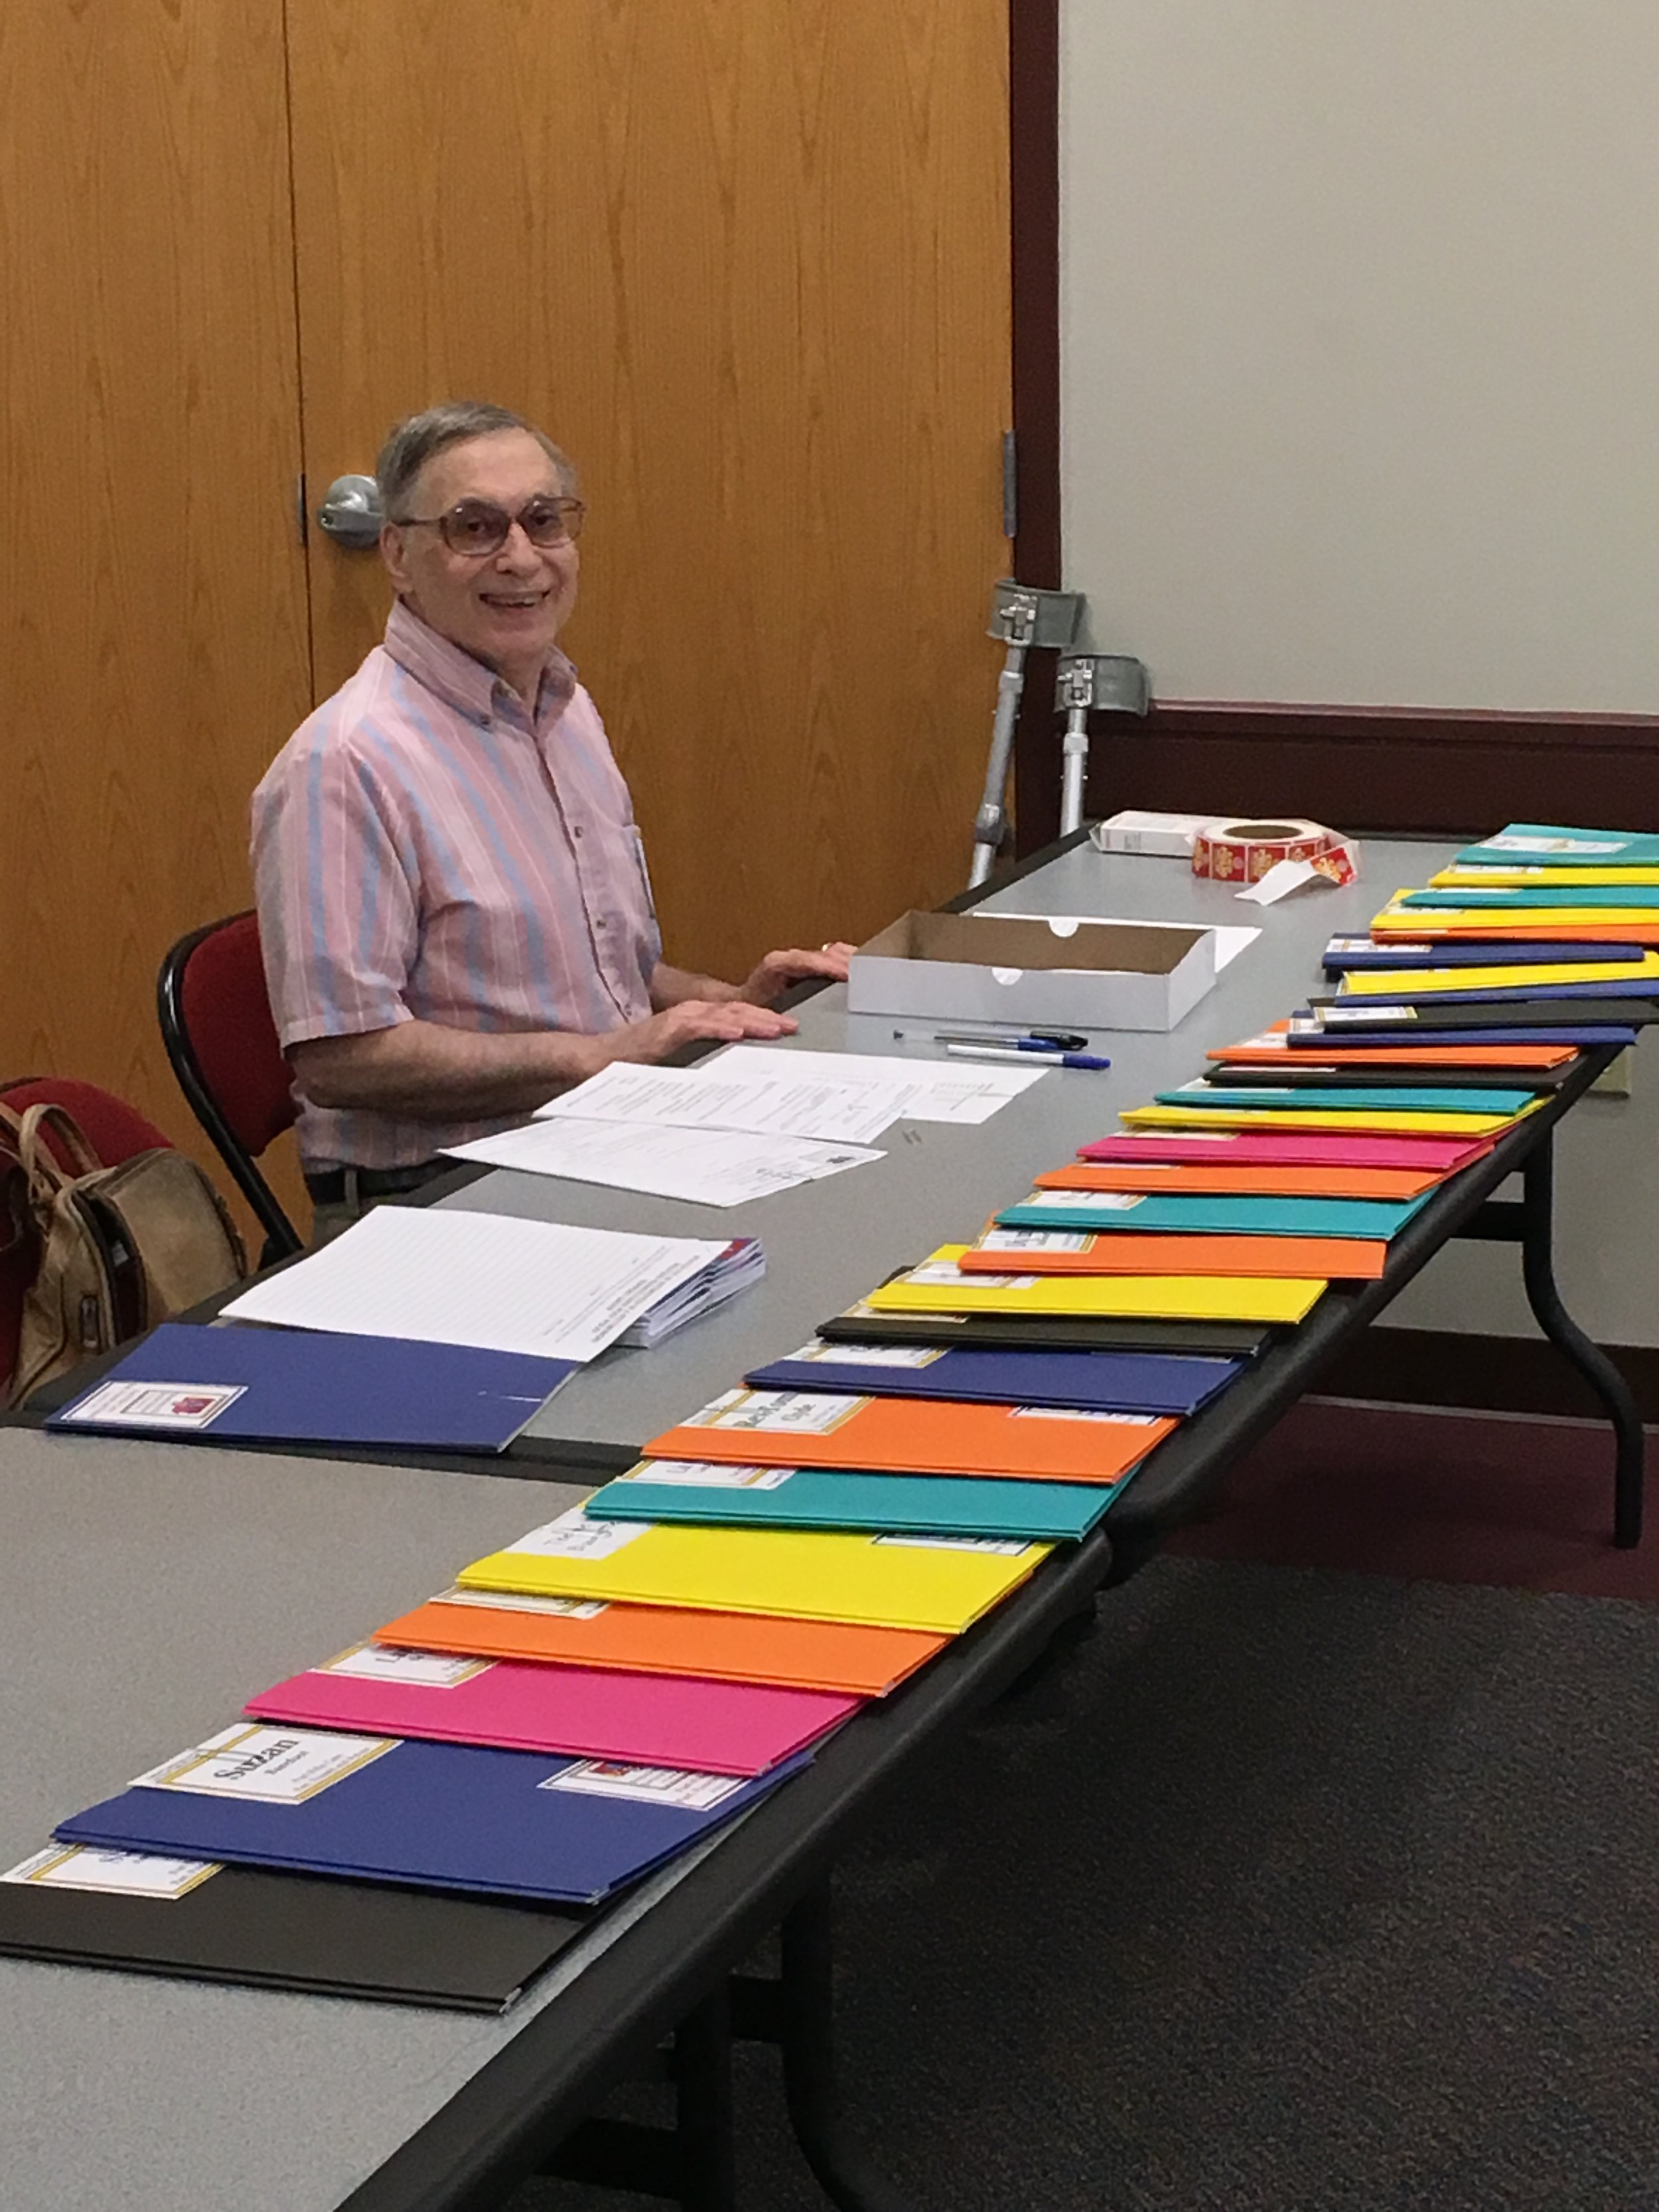  Survivor Joe Randig is ready to greet attendees at the Survivor Conference - Cranberry PA location, 2017 